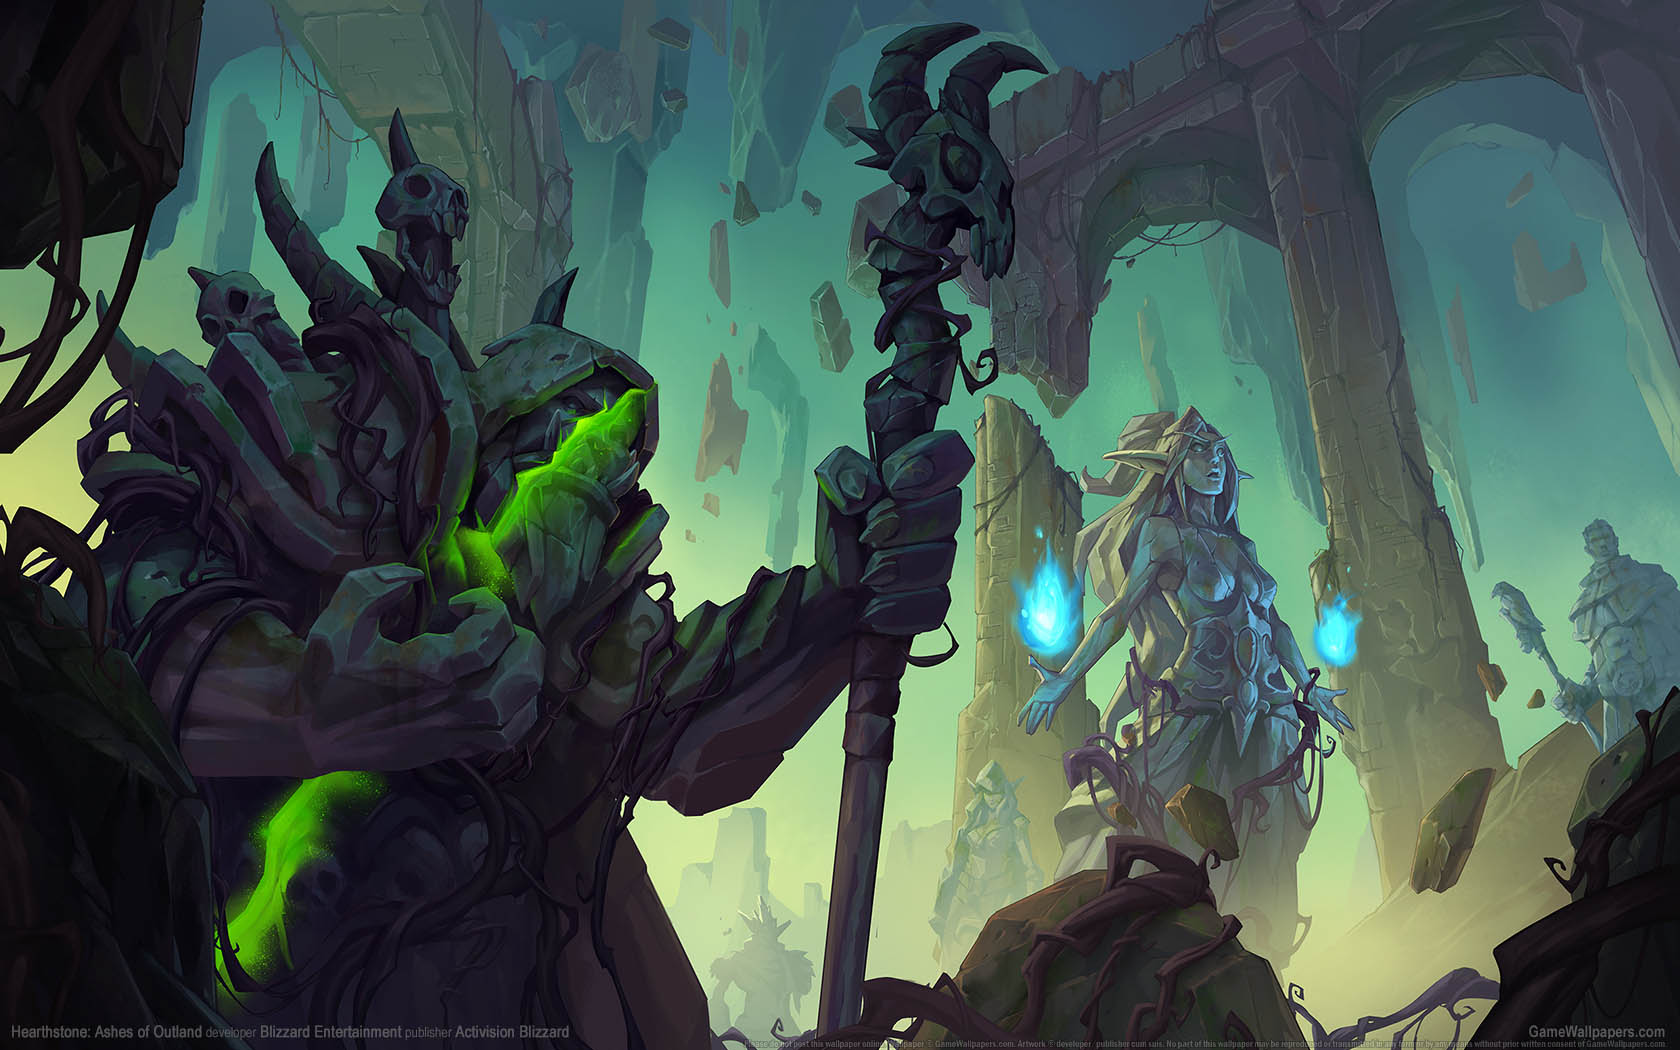 Hearthstone: Ashes of Outland fond d'cran 01 1680x1050